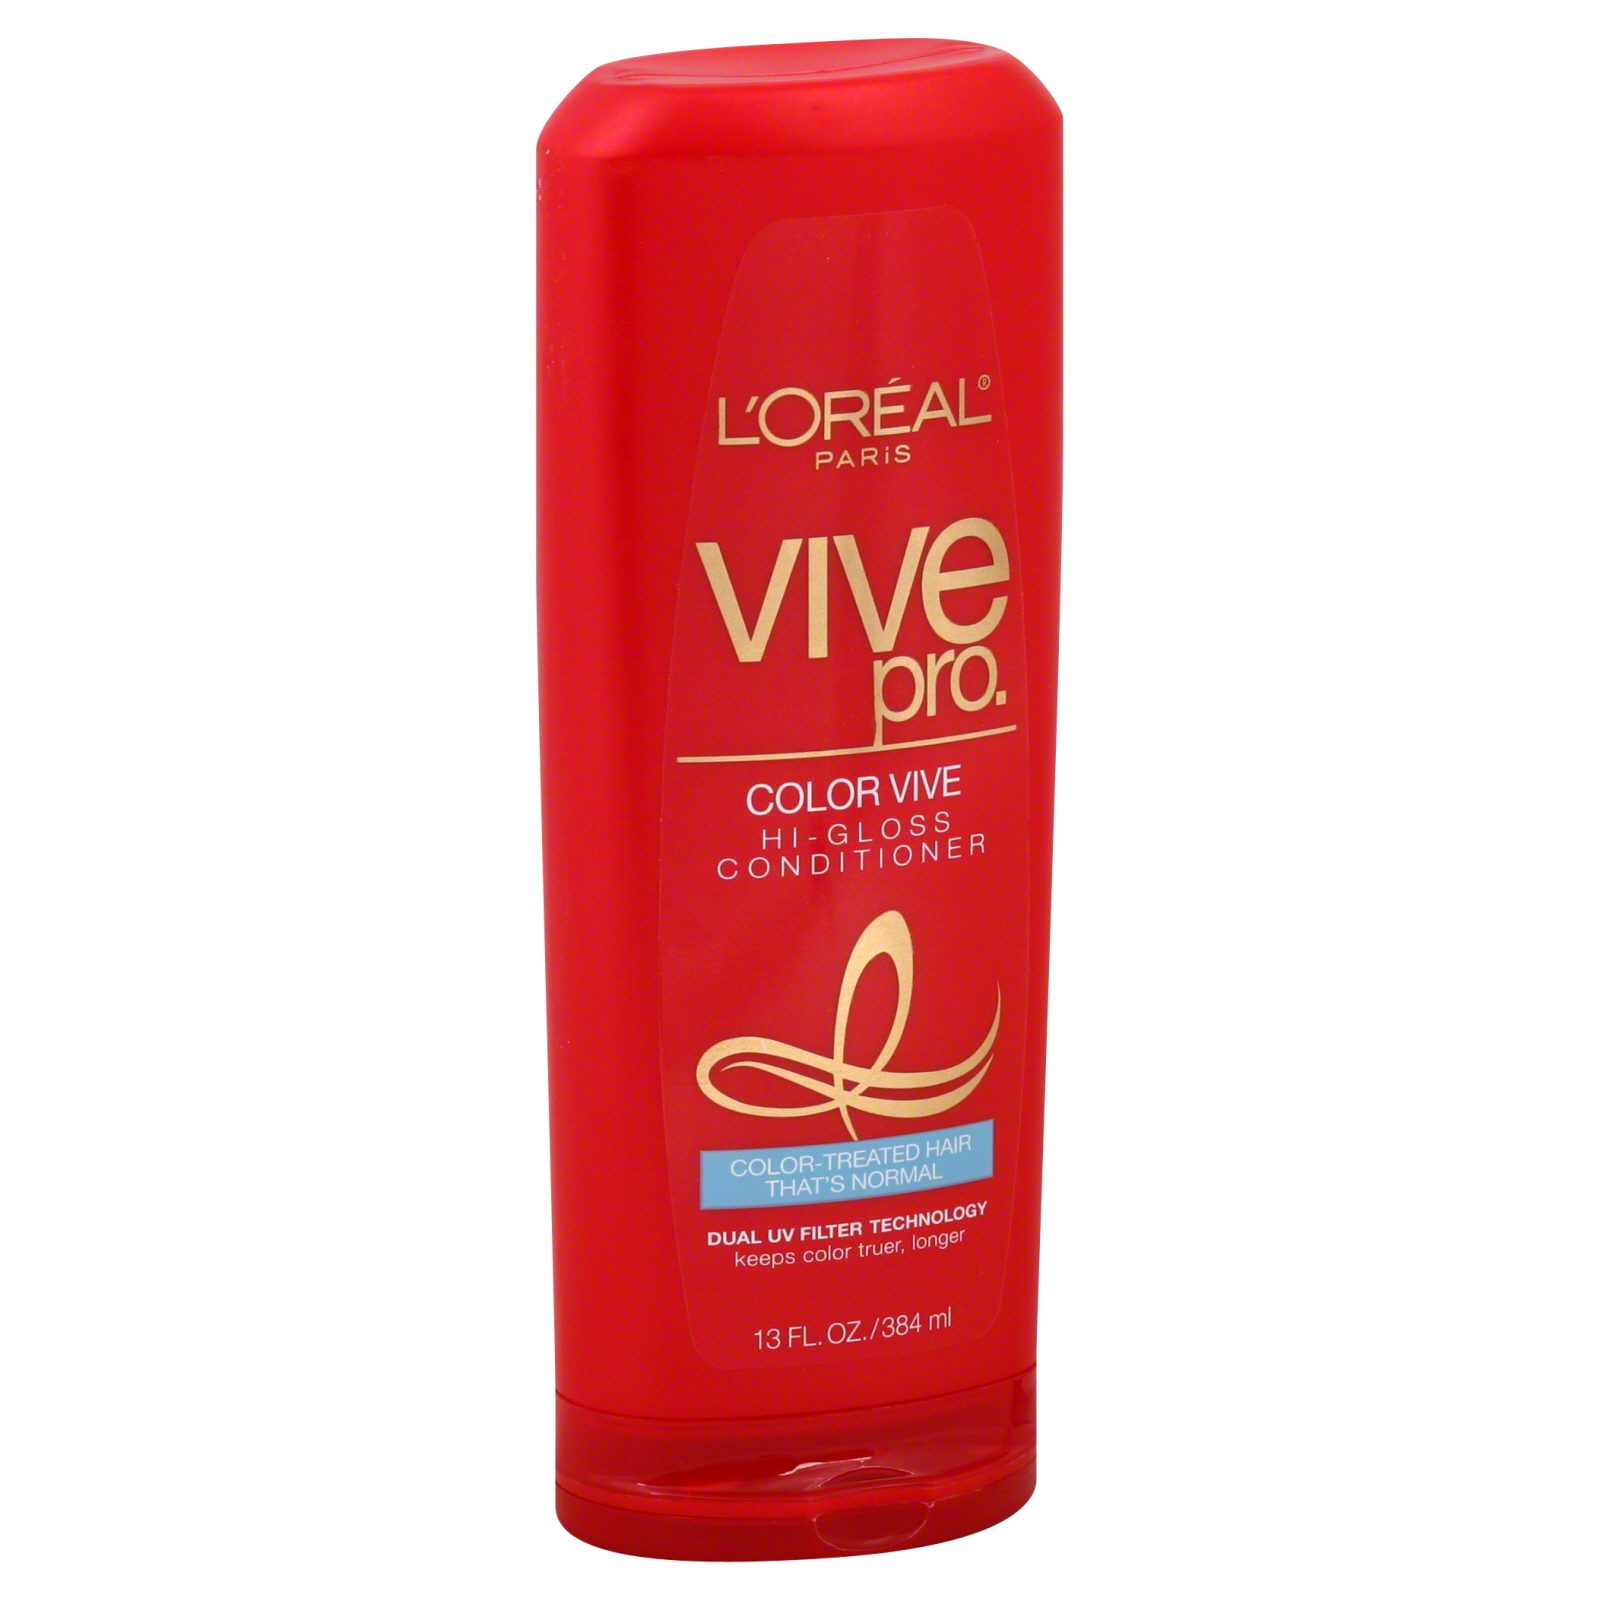 L'Oreal Vive Pro Conditioner, Color Vive Hi-Gloss, Color-Treated Hair